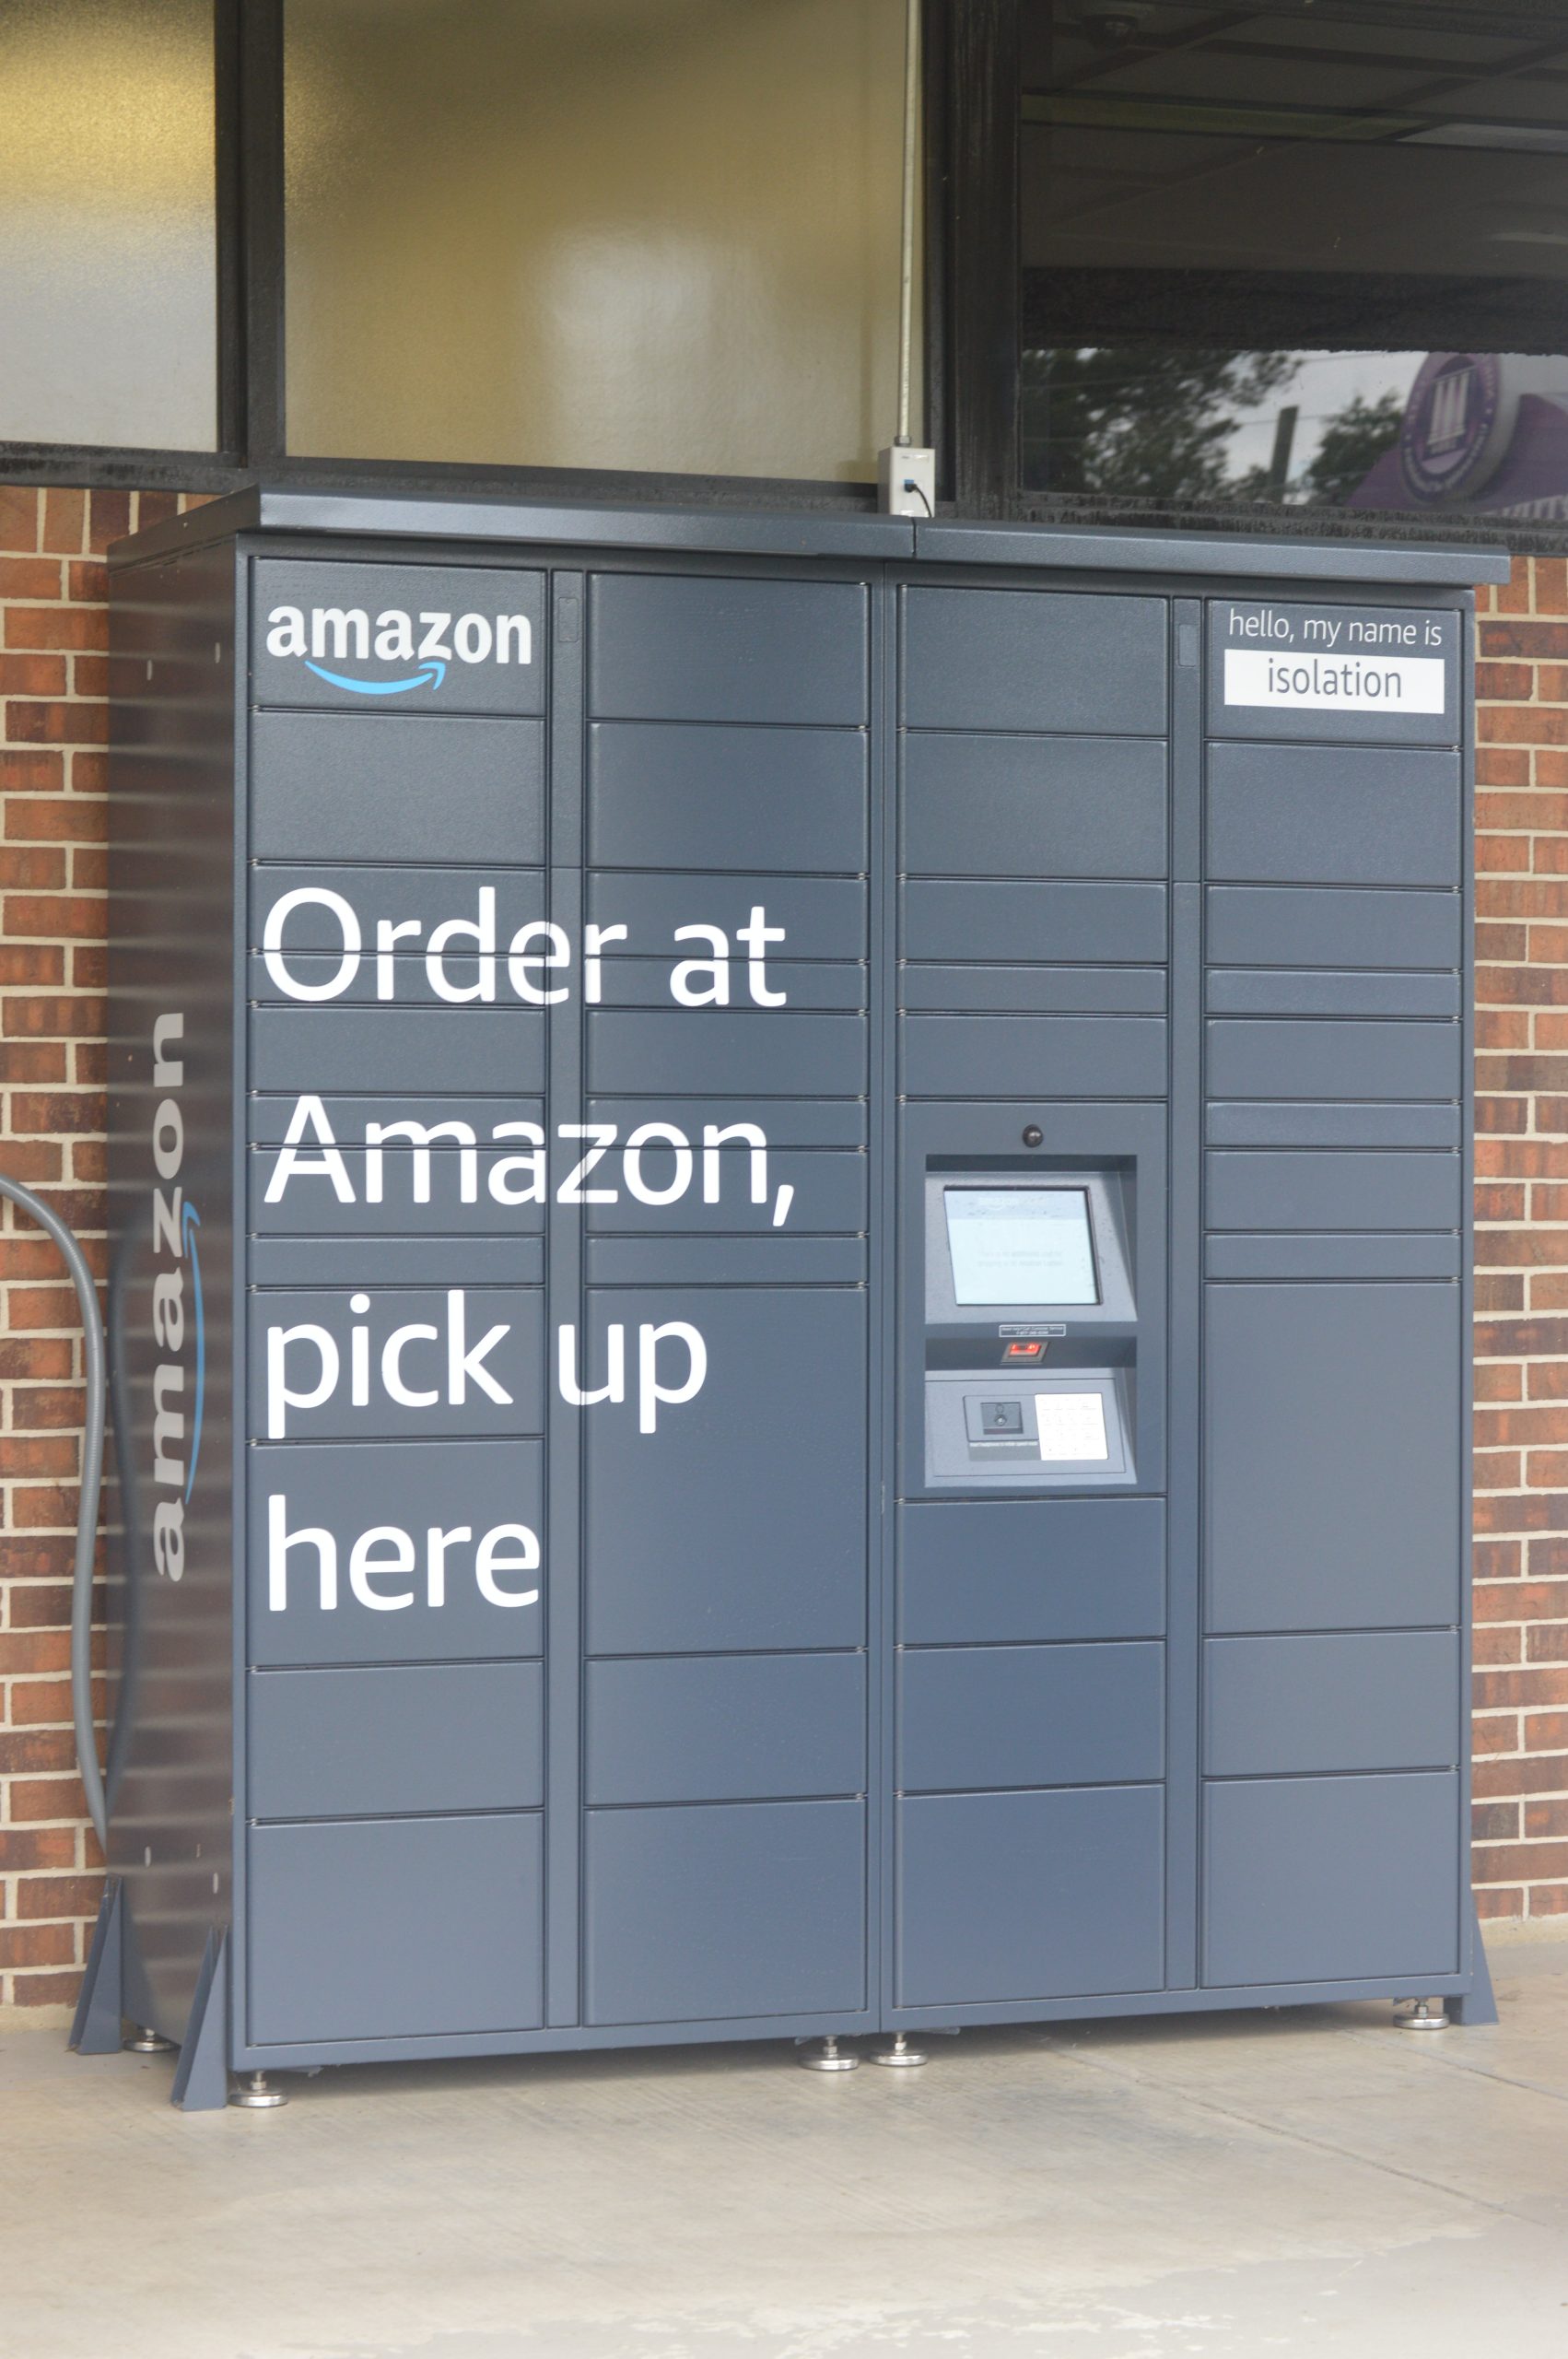 The Amazon Lockers are a new addition to Northwestern State University of Louisiana, available to any student at any time of the day when they choose to have their packages delivered to the lockers.